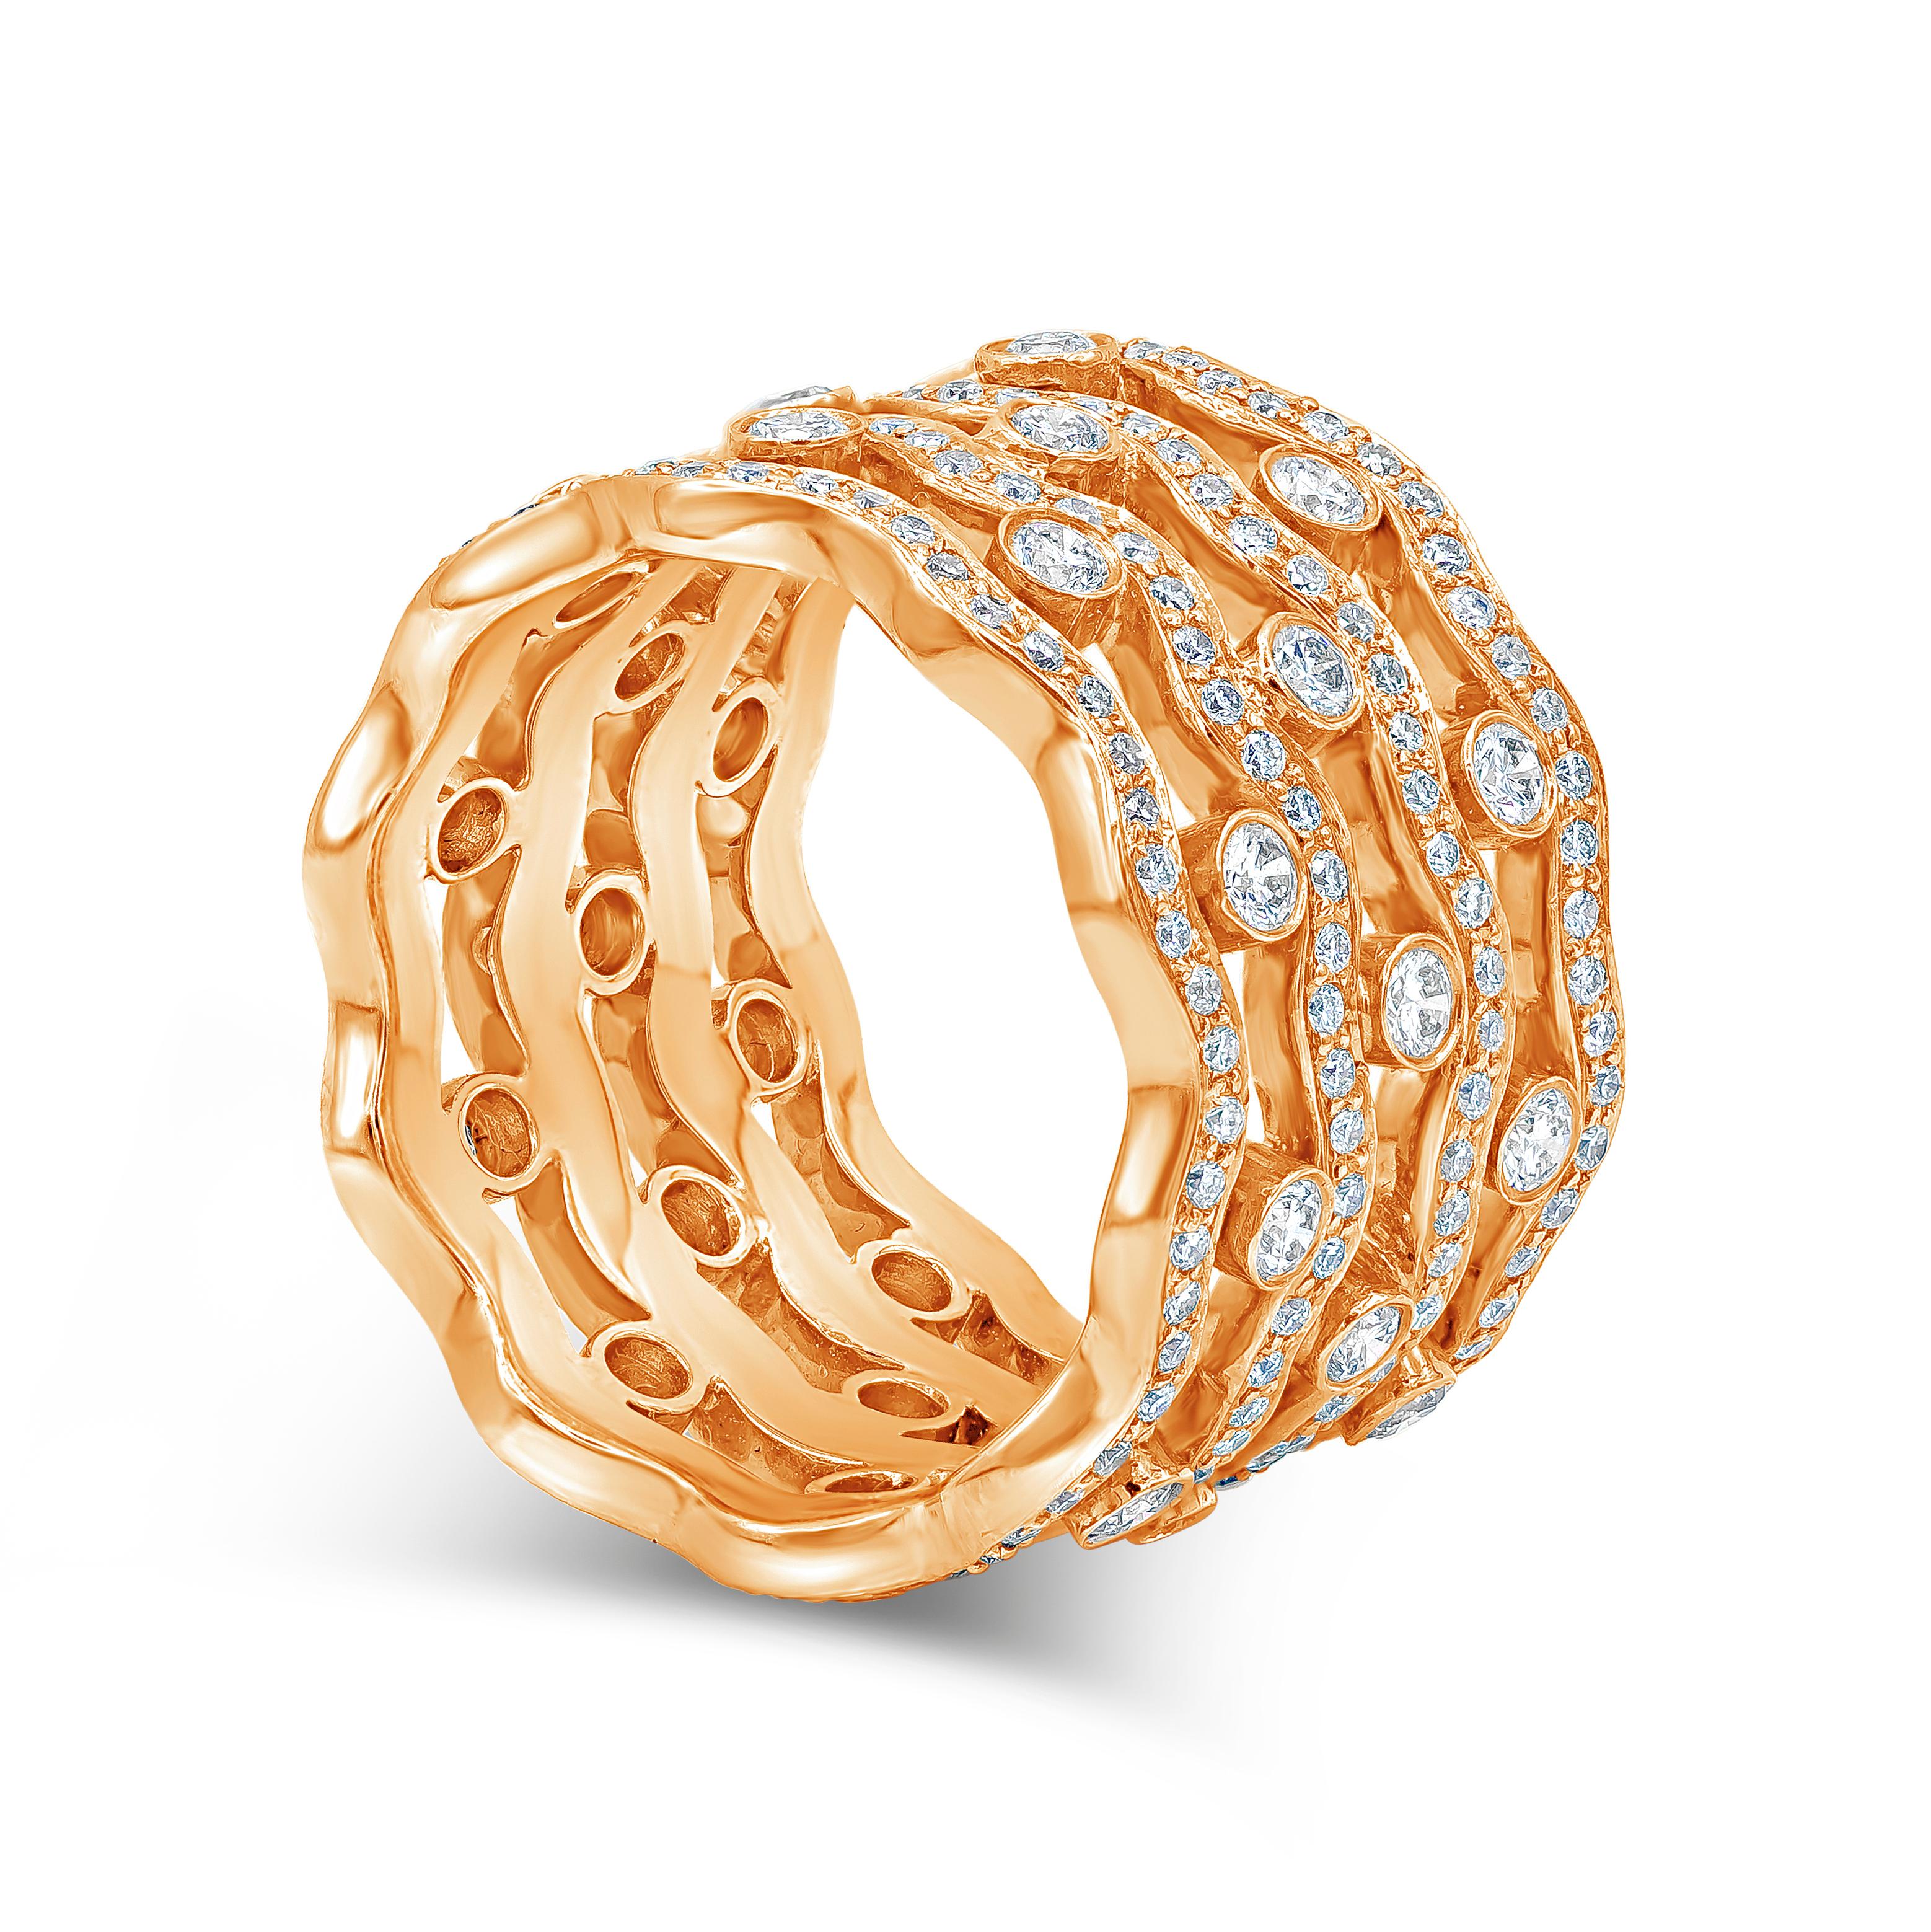 A fashionable and color-rich wide ring showcasing four rows of round brilliant diamonds, set in a wavy pattern. Spacing the rows are evenly-spaced round diamonds in an open-work design. Diamonds weigh 1.69 carats total. Made in 18K Rose Gold, Size